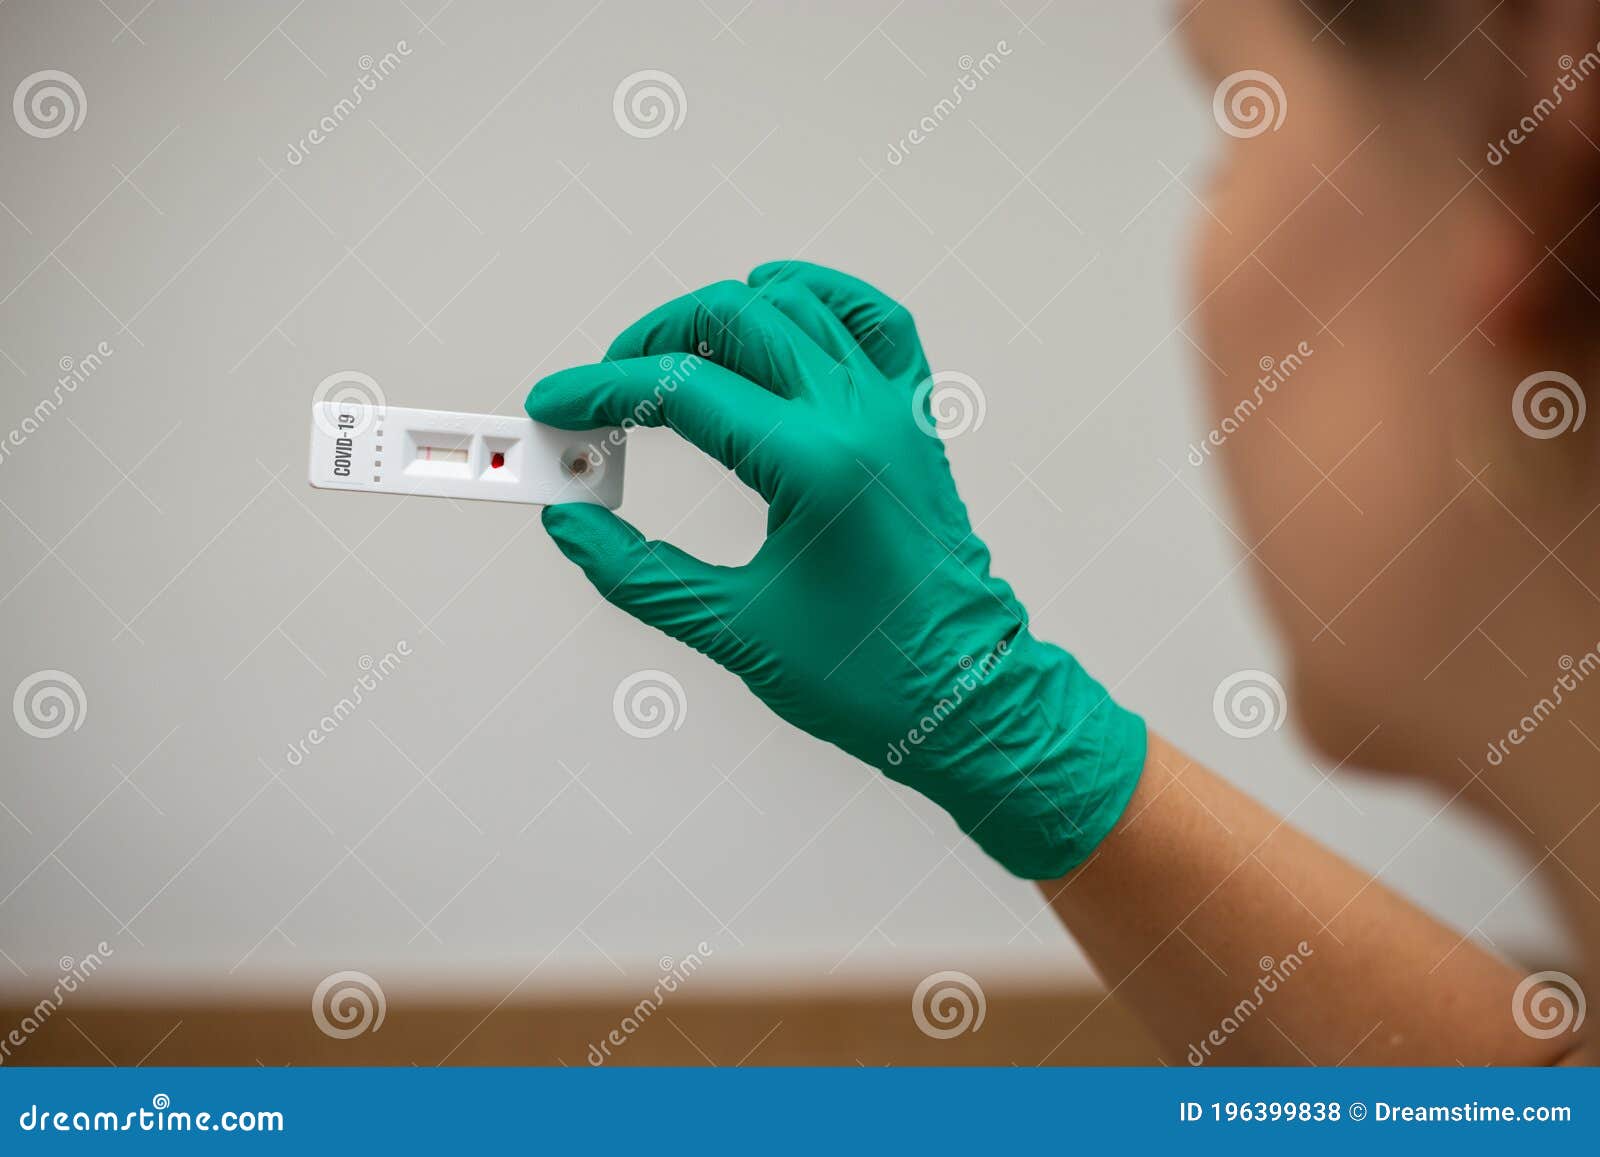 woman doctor looking at covid-19 rapid test wearing green latex gloves